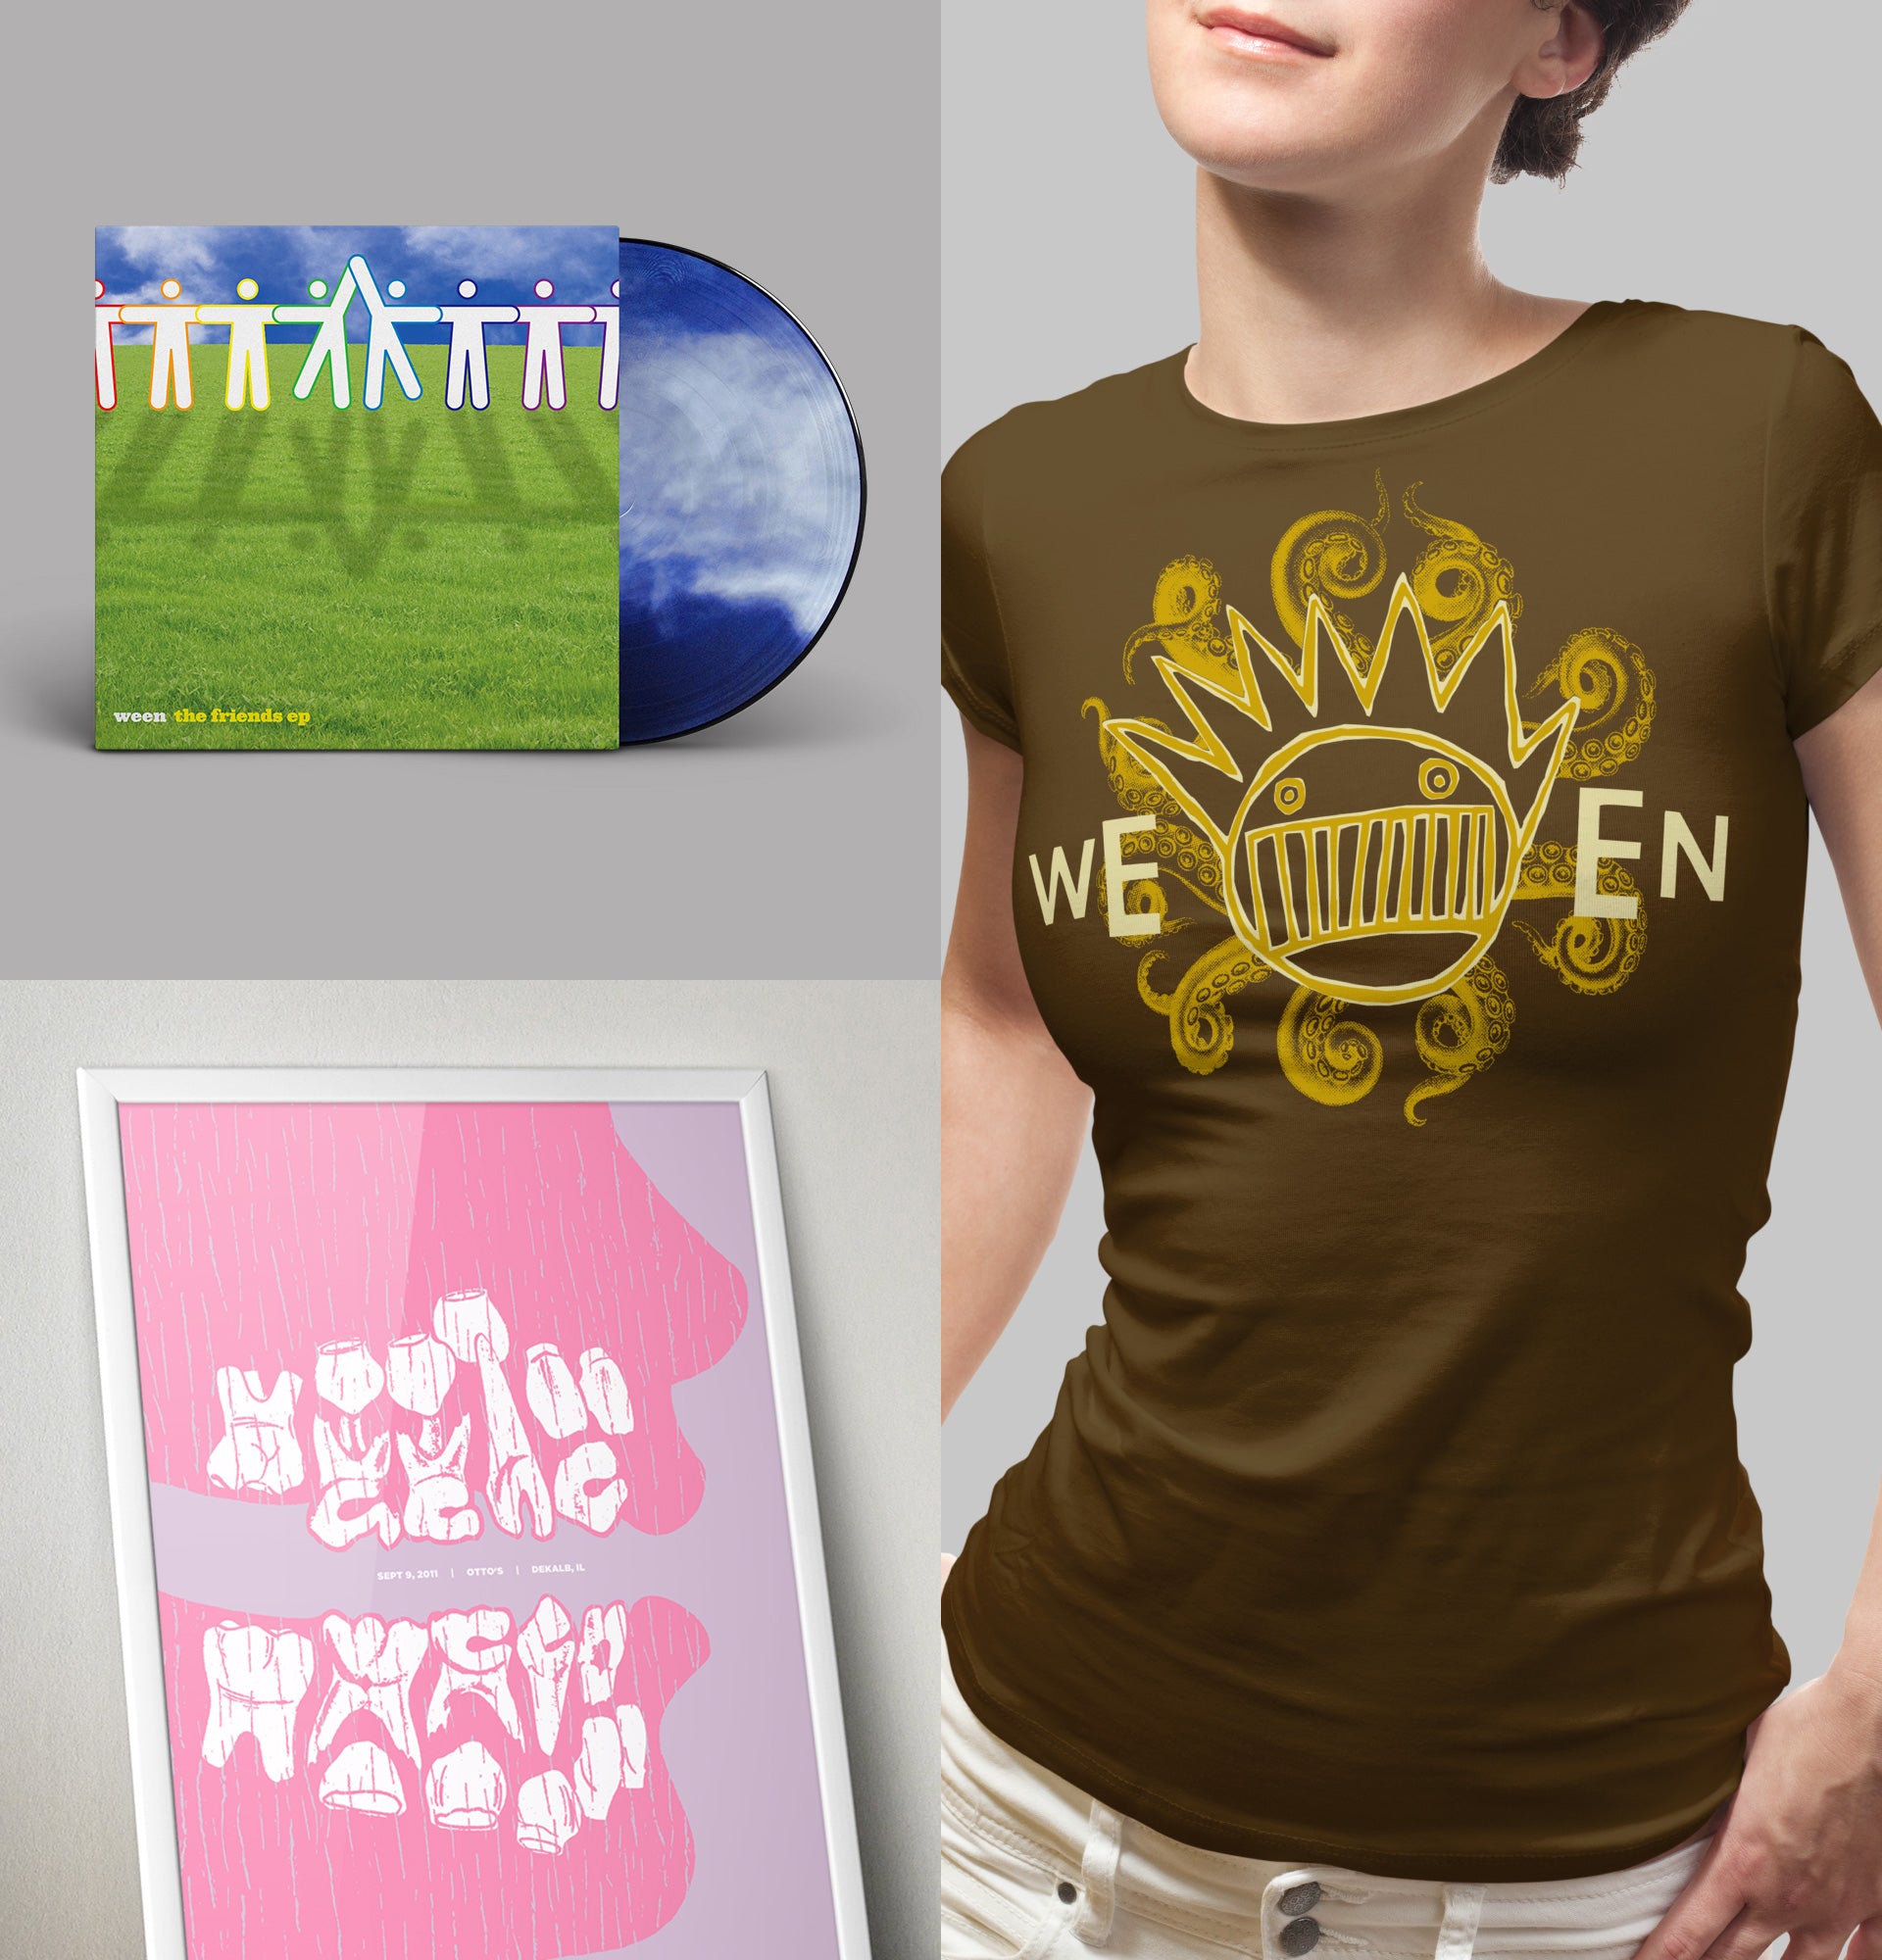 Ween 'The Friends EP', Gene Ween 'Tooth' poster, Ween 'Boognish Tentacles' t-shirt